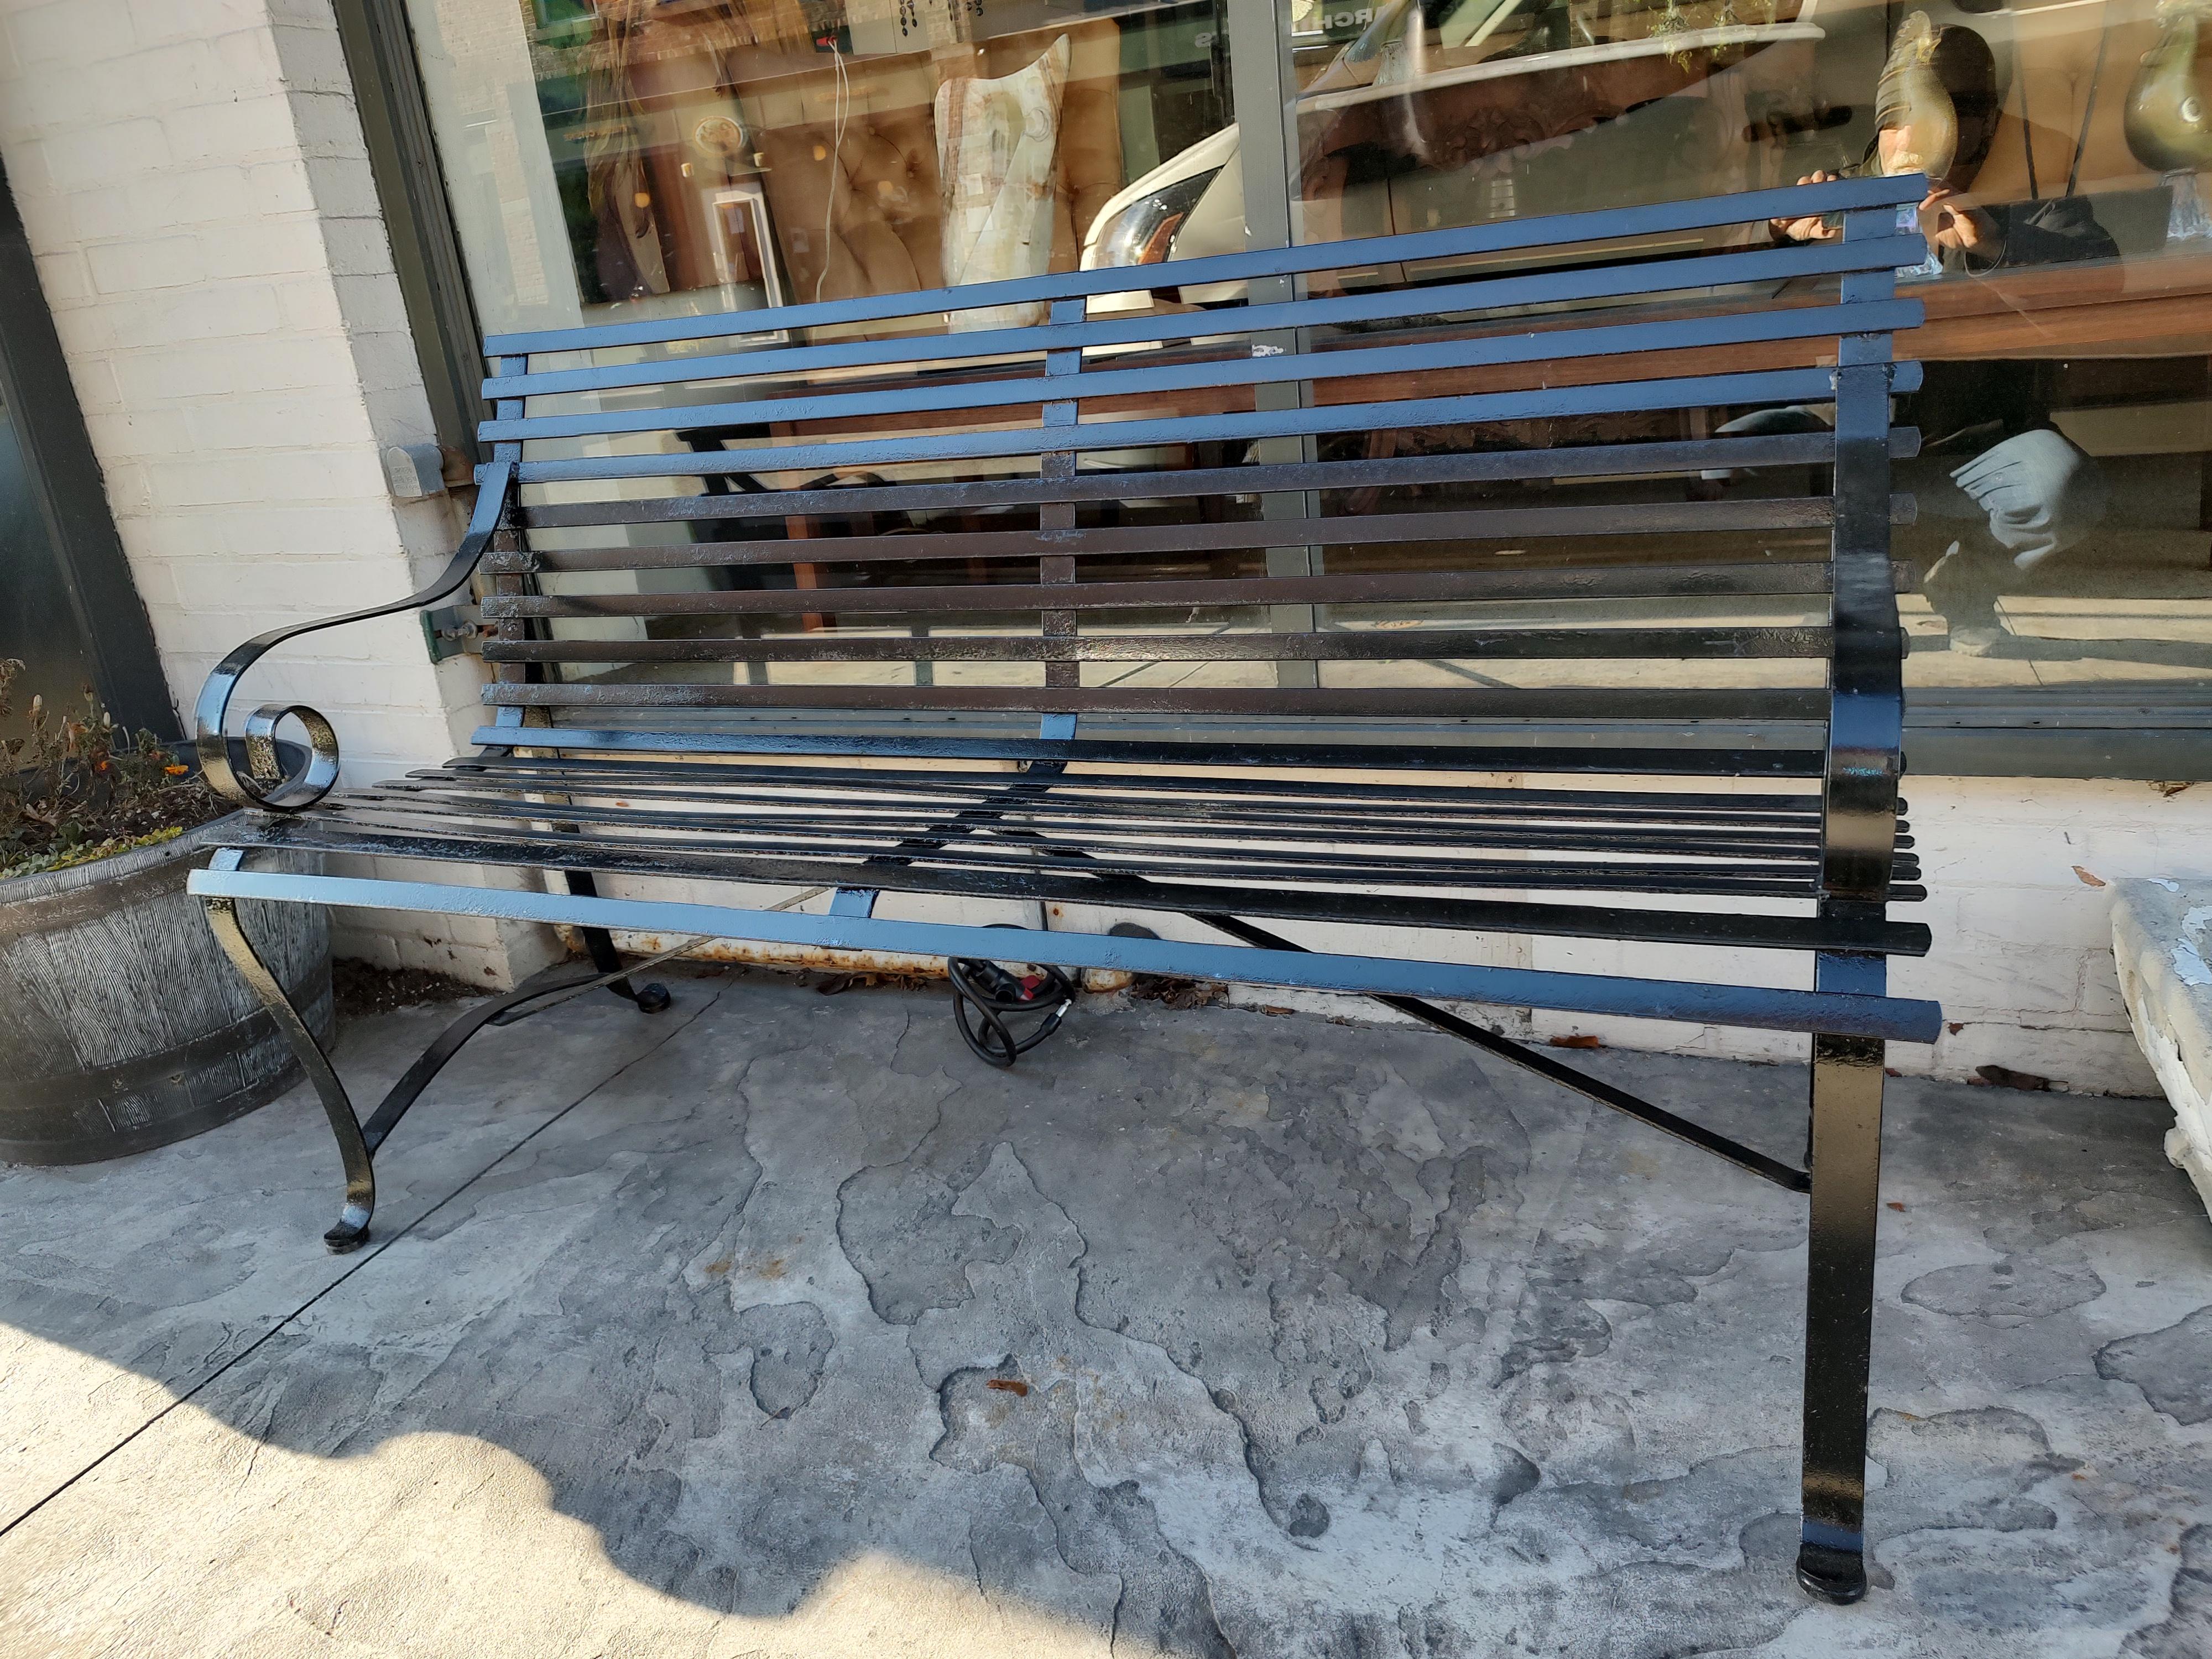 Simple and elegant strap iron 5 ft. garden park Bench. In excellent vintage condition with minimal wear. Was recently painted black and is ready for your garden, porch or hallway. Plastic glides installed for ease and protection of wood floors. Very